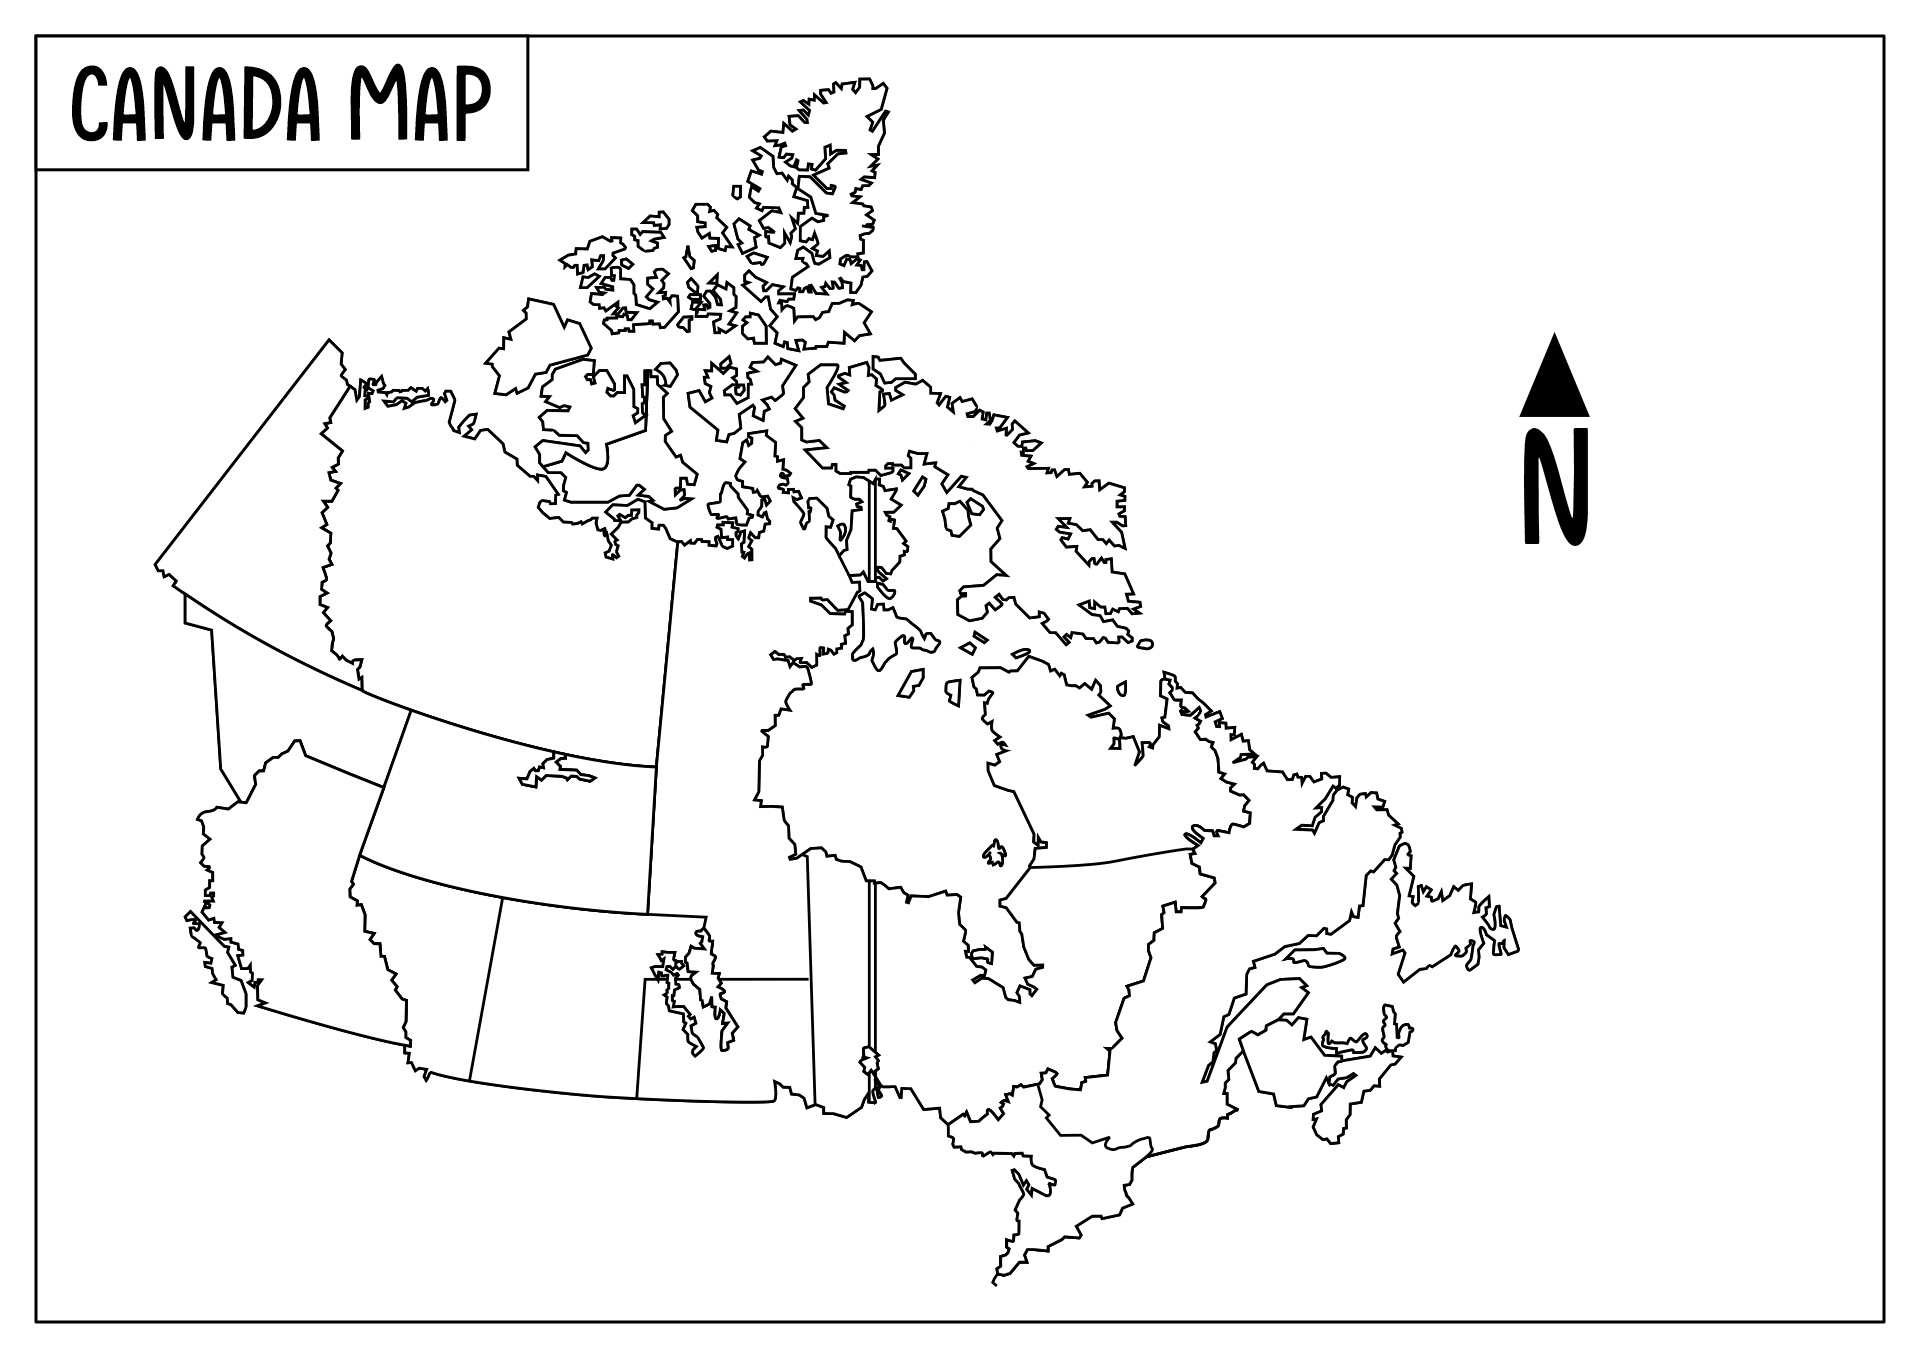 9 Best Images of Canada Map Worksheet - Practice Maps Capital Cities ...